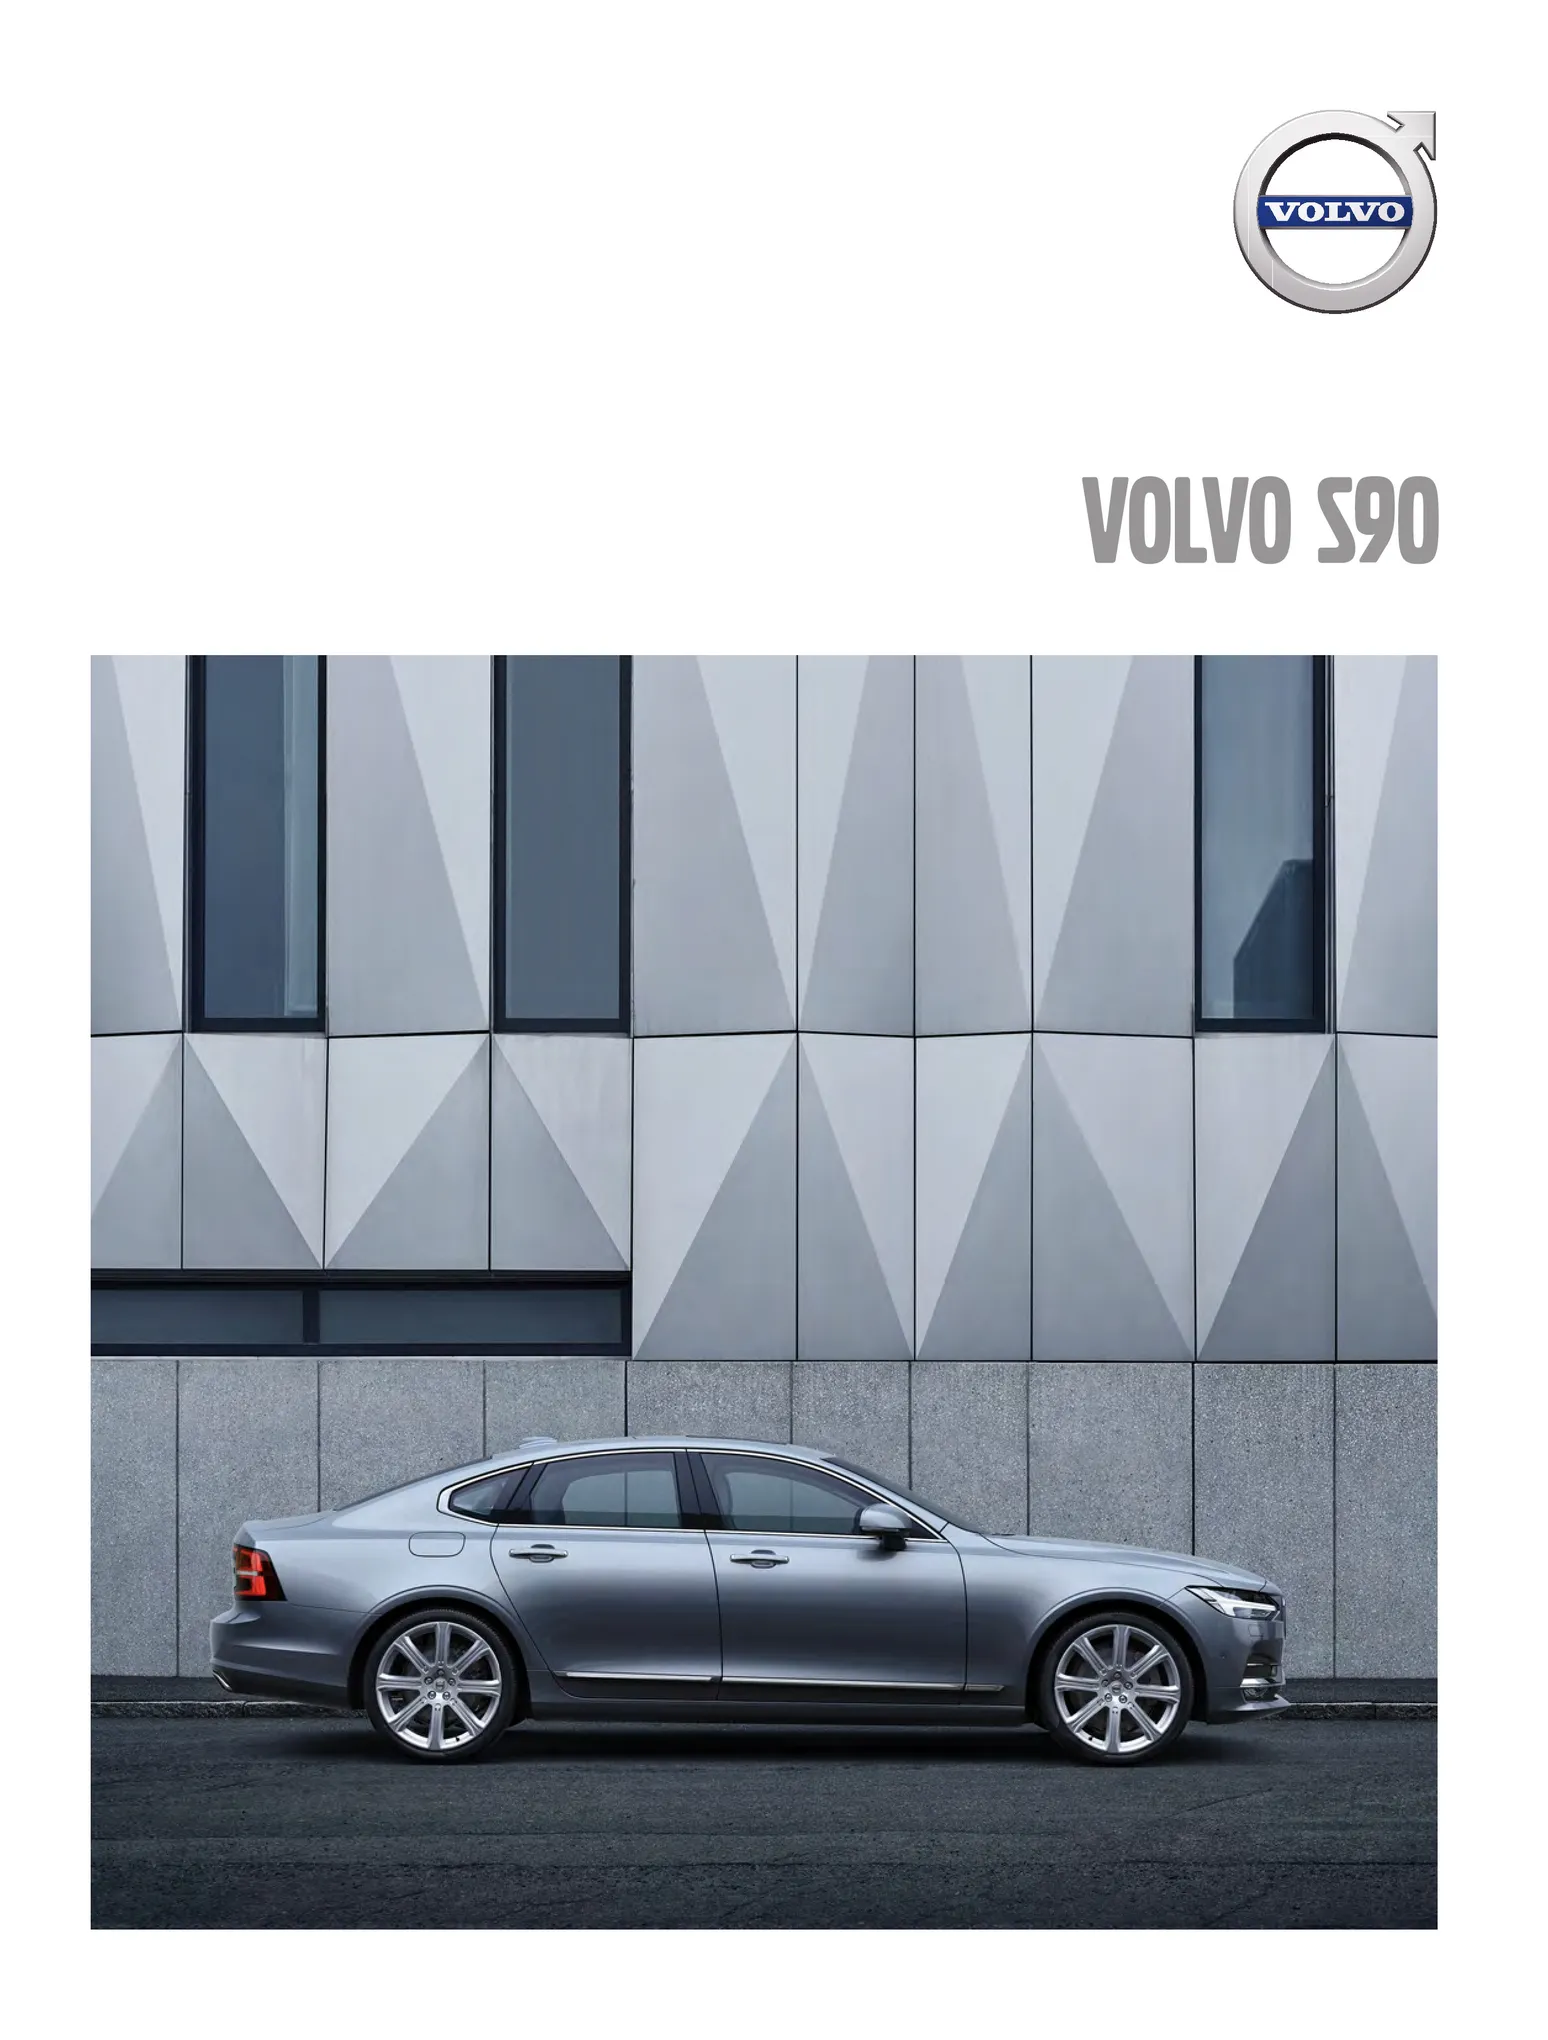 Catalogue VOLVO S90, page 00001